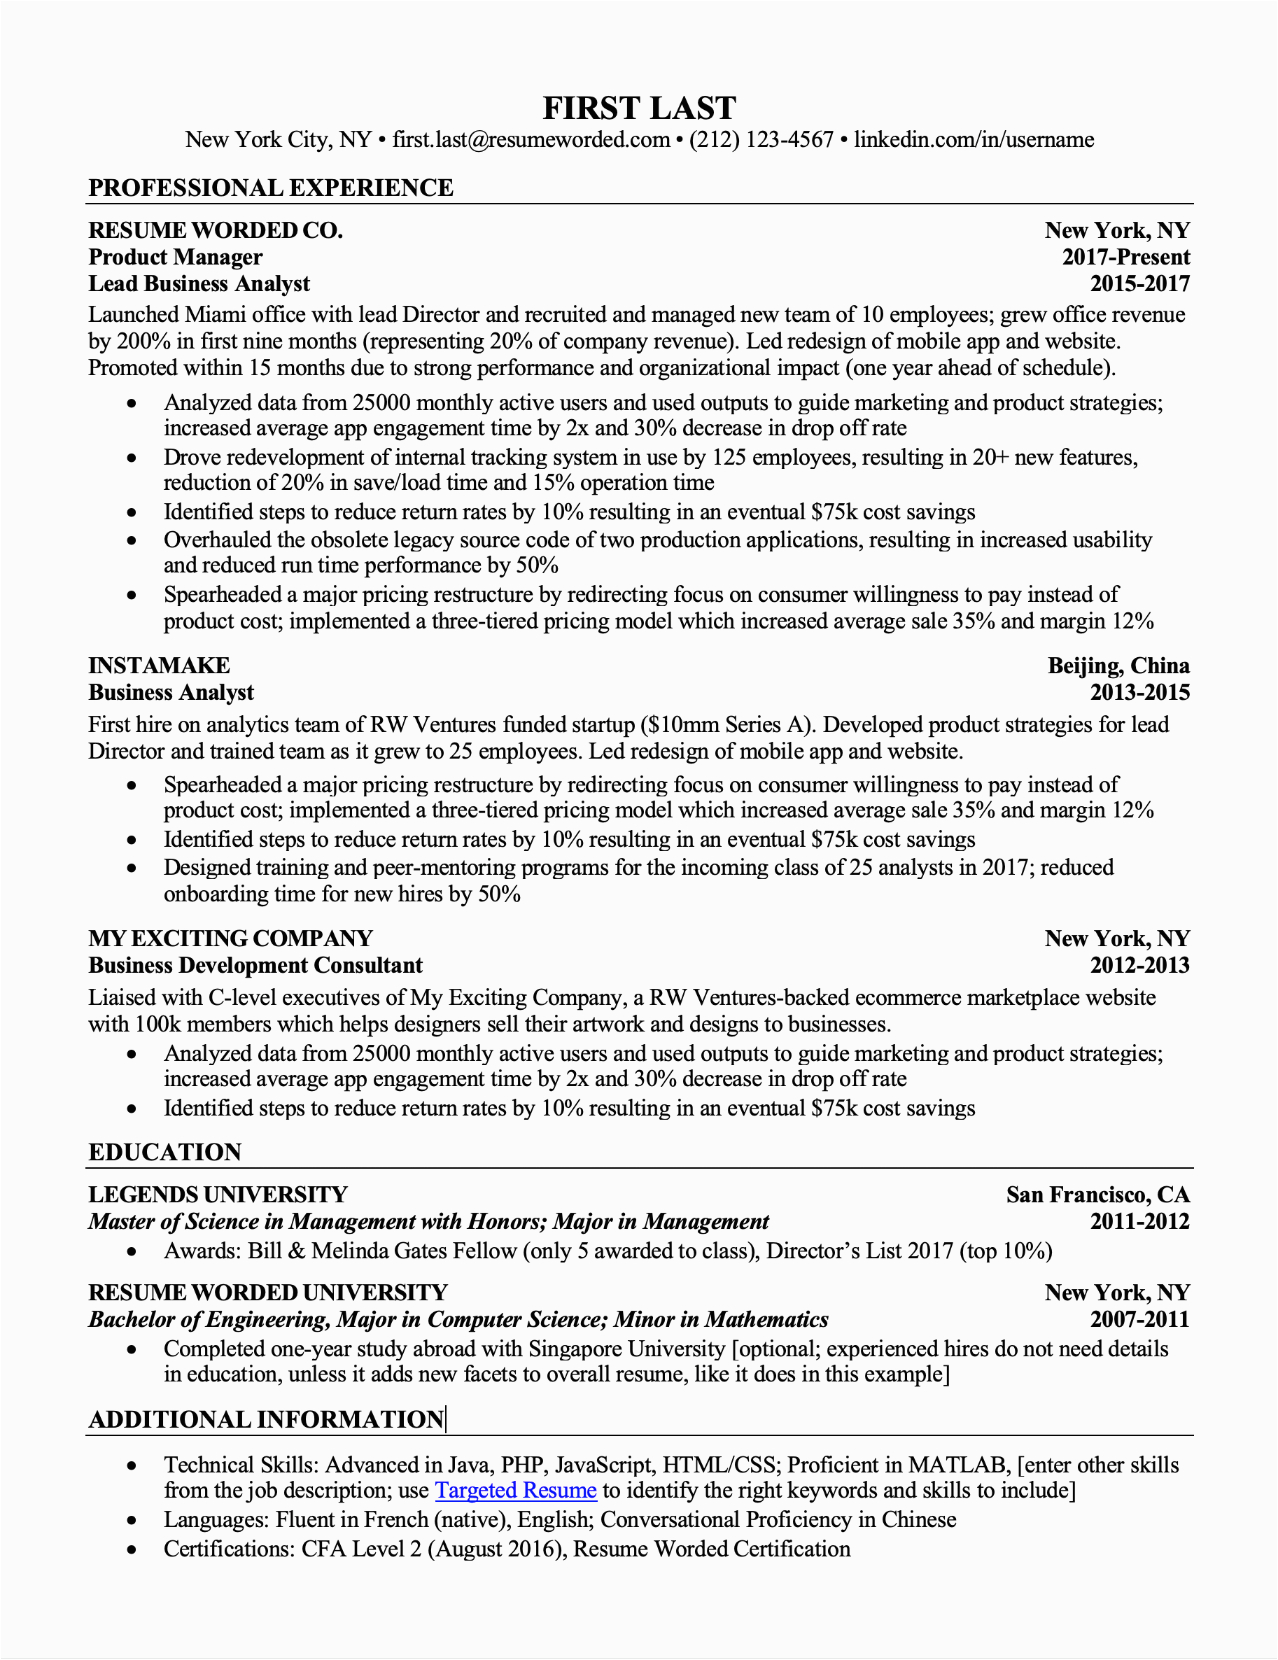 Resume Template for Lots Of Experience Work Experience Resume format for Experienced the 2